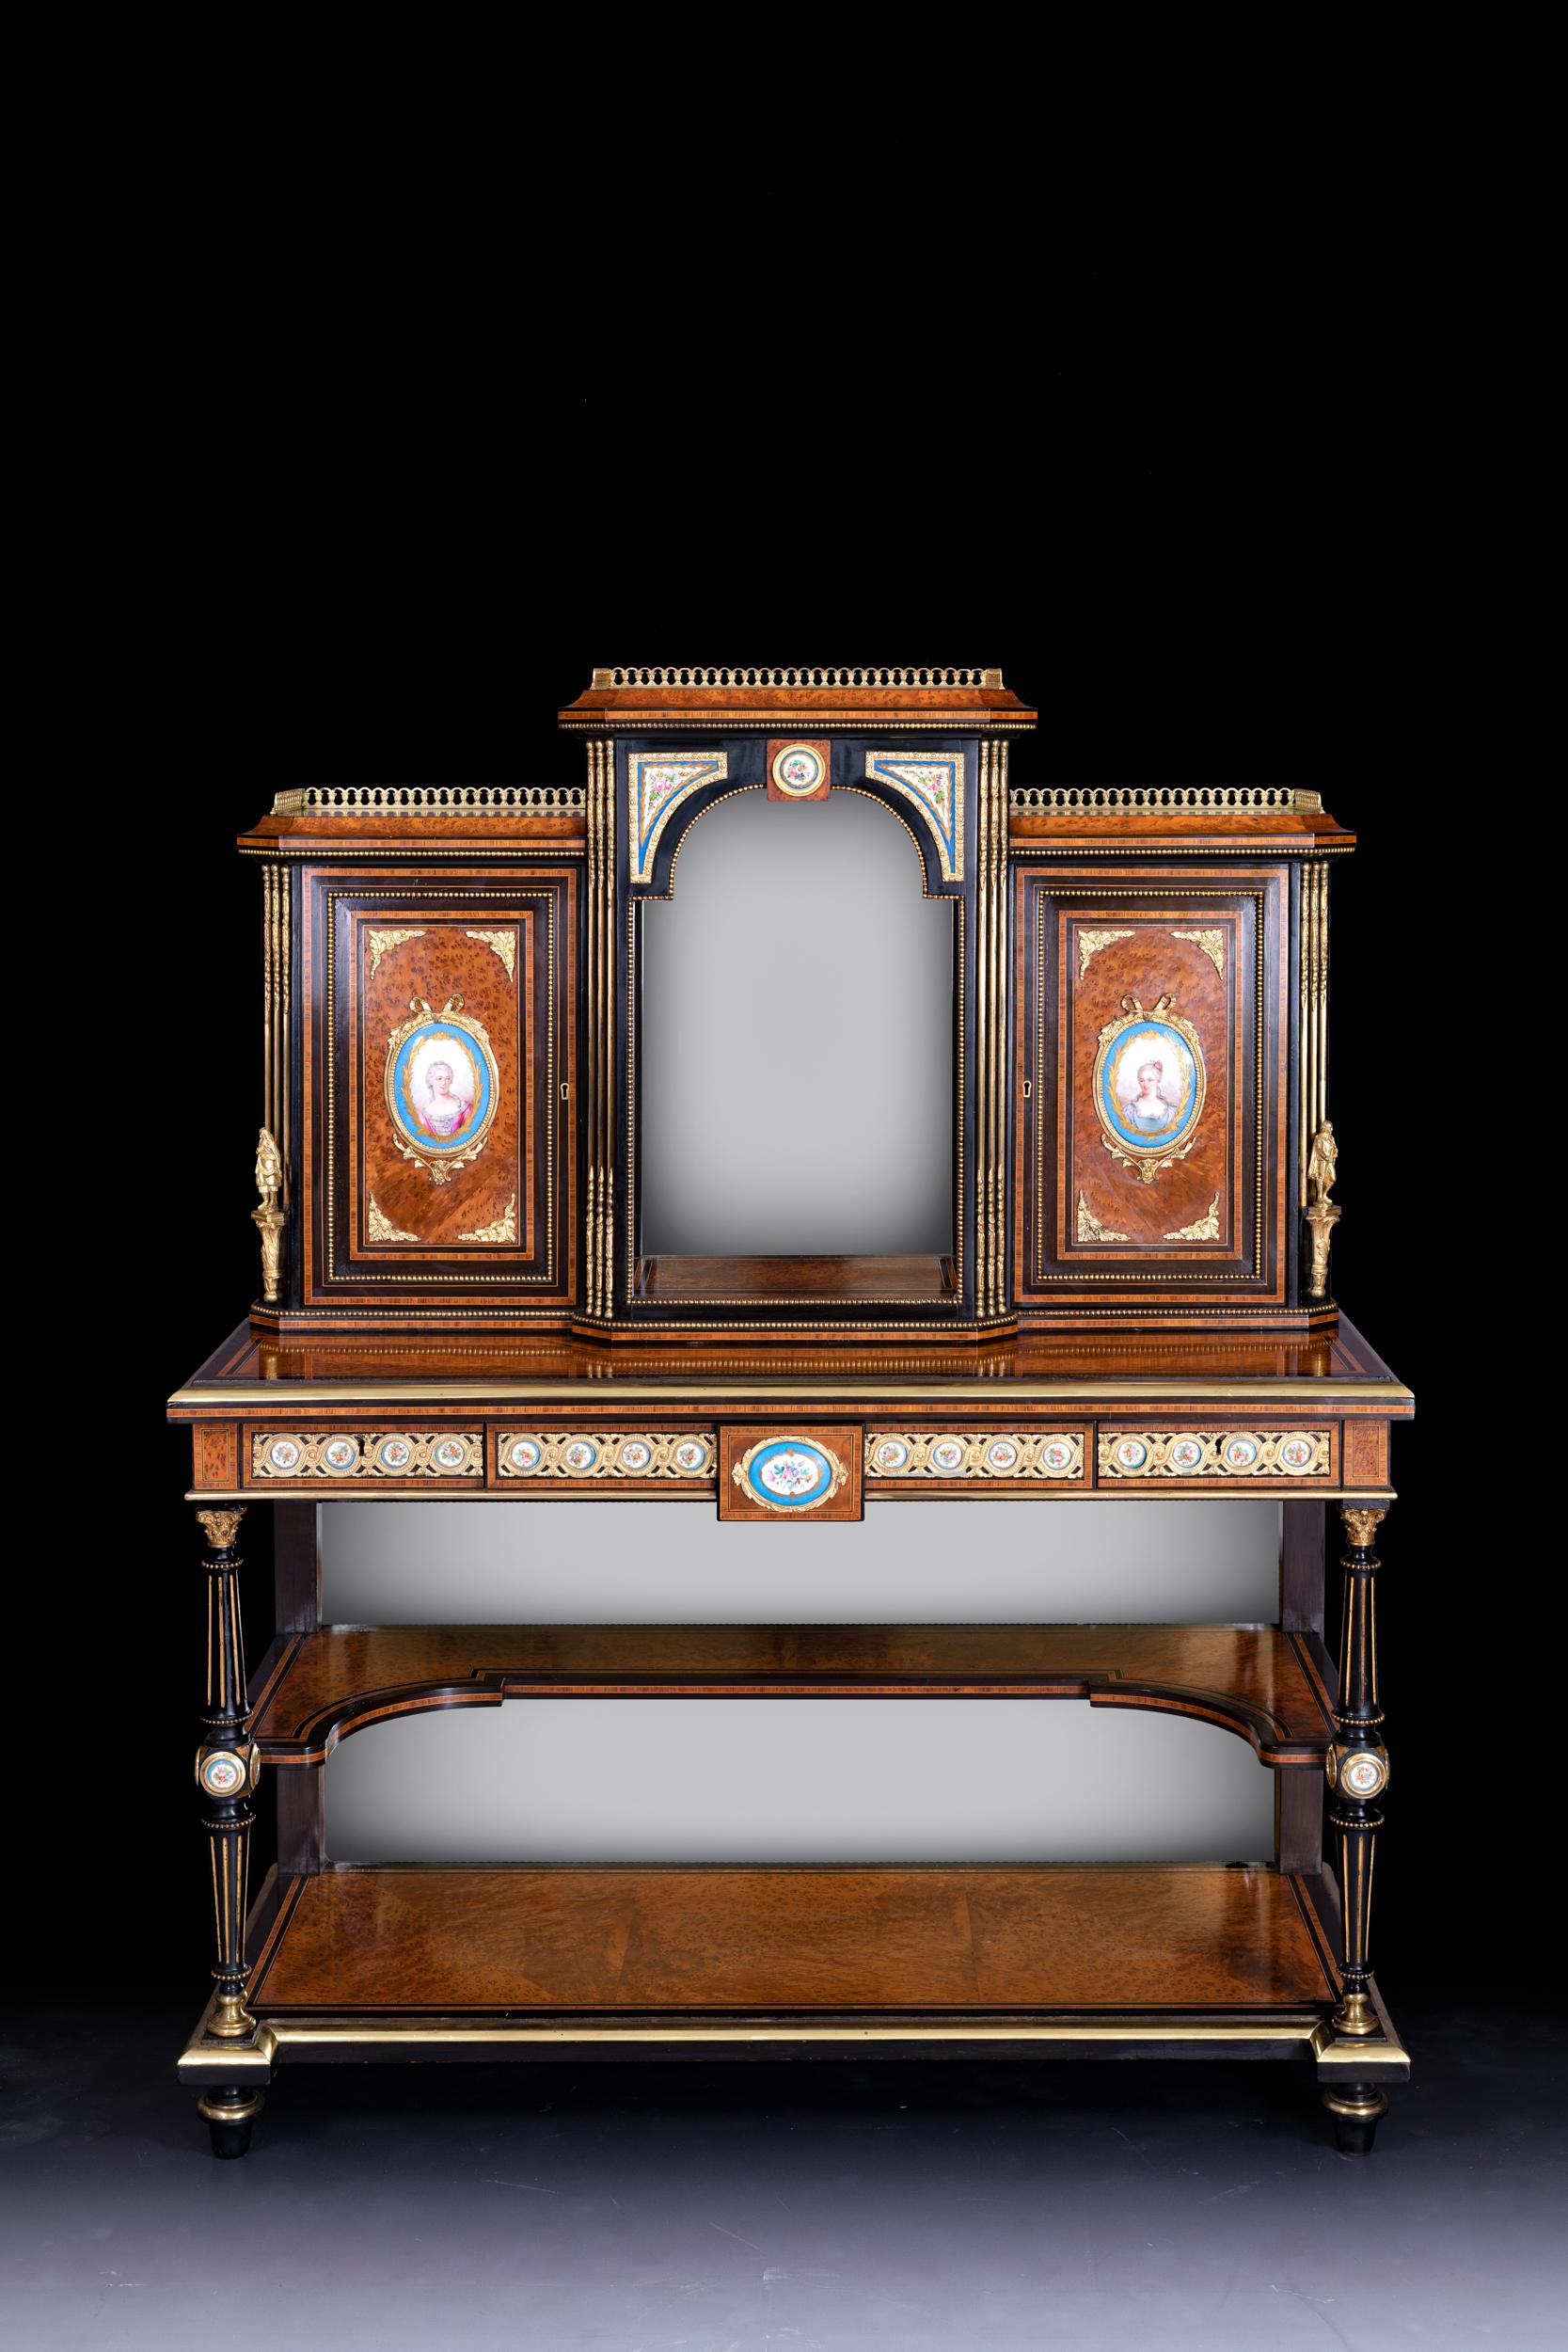 A very fine 19th century Burr walnut, ebonised , ormolu and porcelain Bonheur du jour, the superstructure with pierced brass galleries above an open compartment with mirrored interior flanked by cupboards with oval serves panels containing shelves